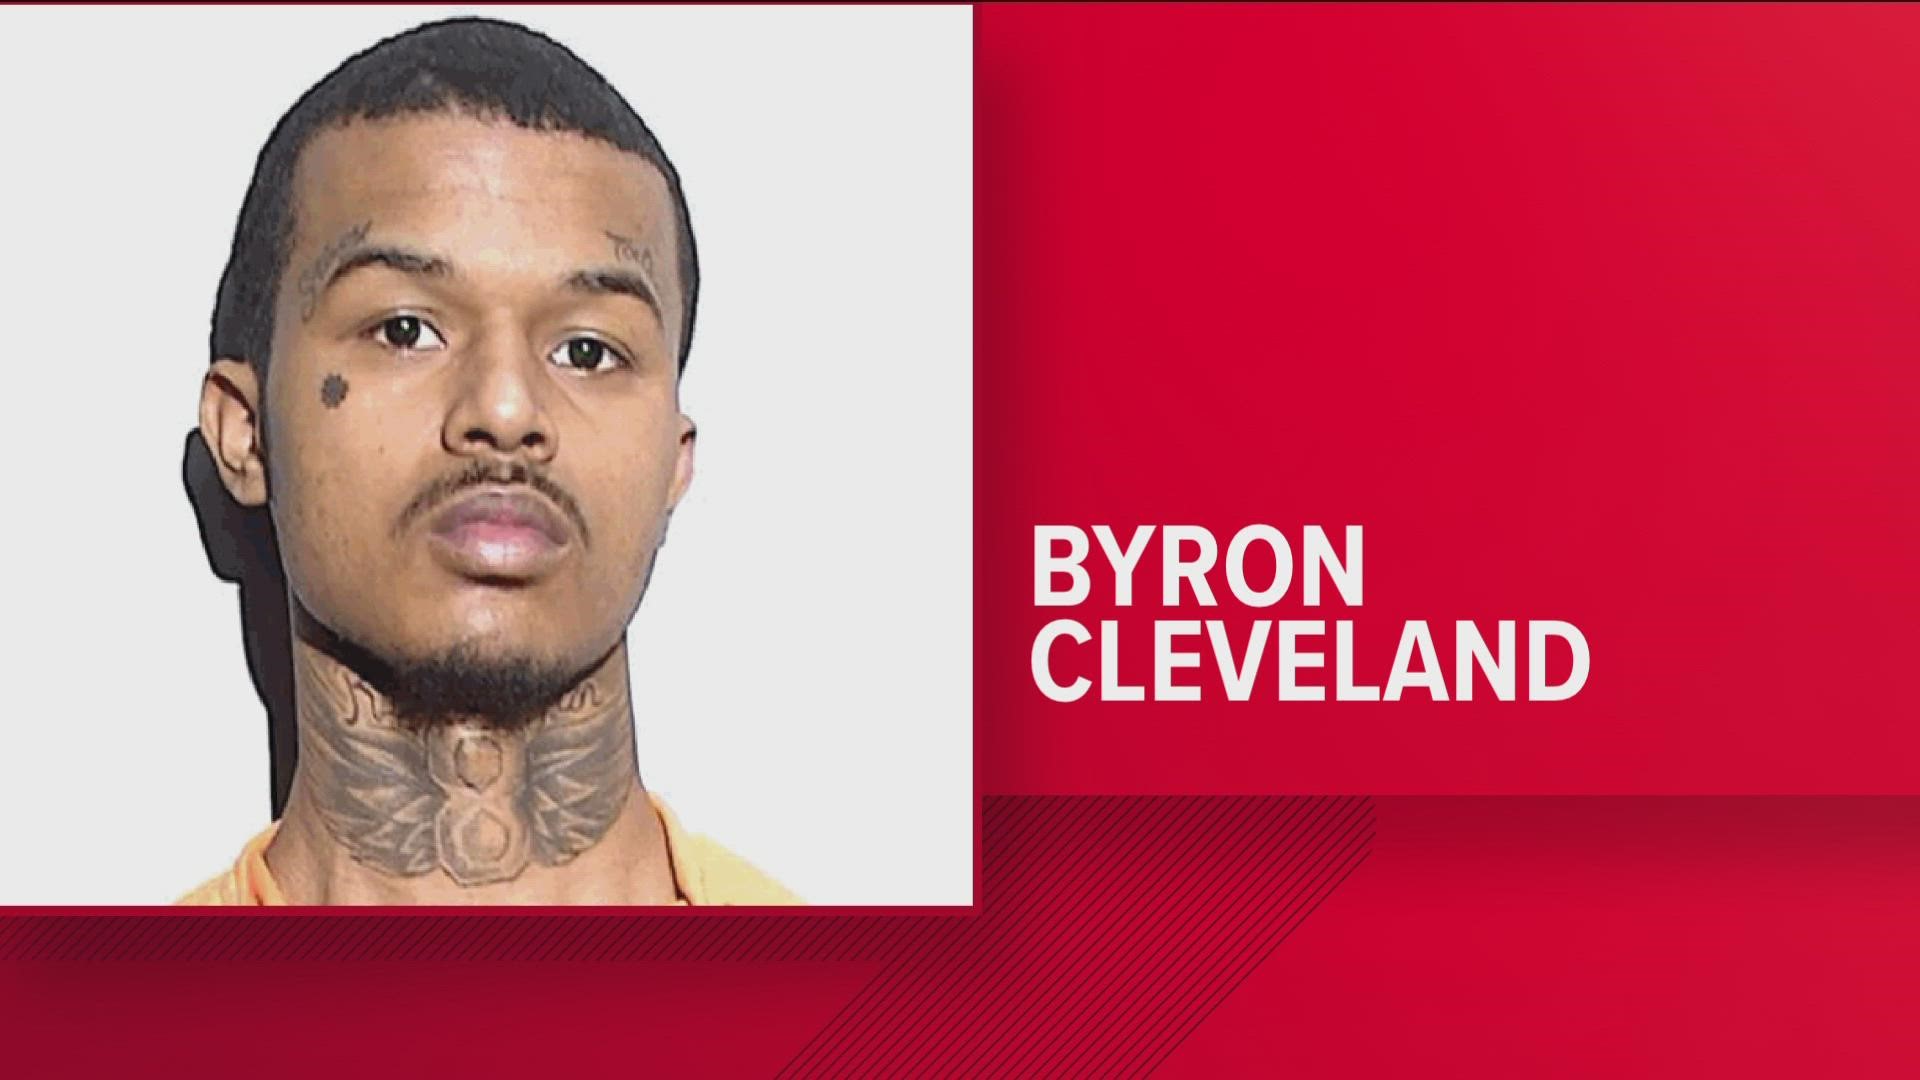 Police apprehended Byron Cleveland in Toledo Wednesday. He has been wanted in connection with the February shooting death of 10-year-old Damia Ezell.